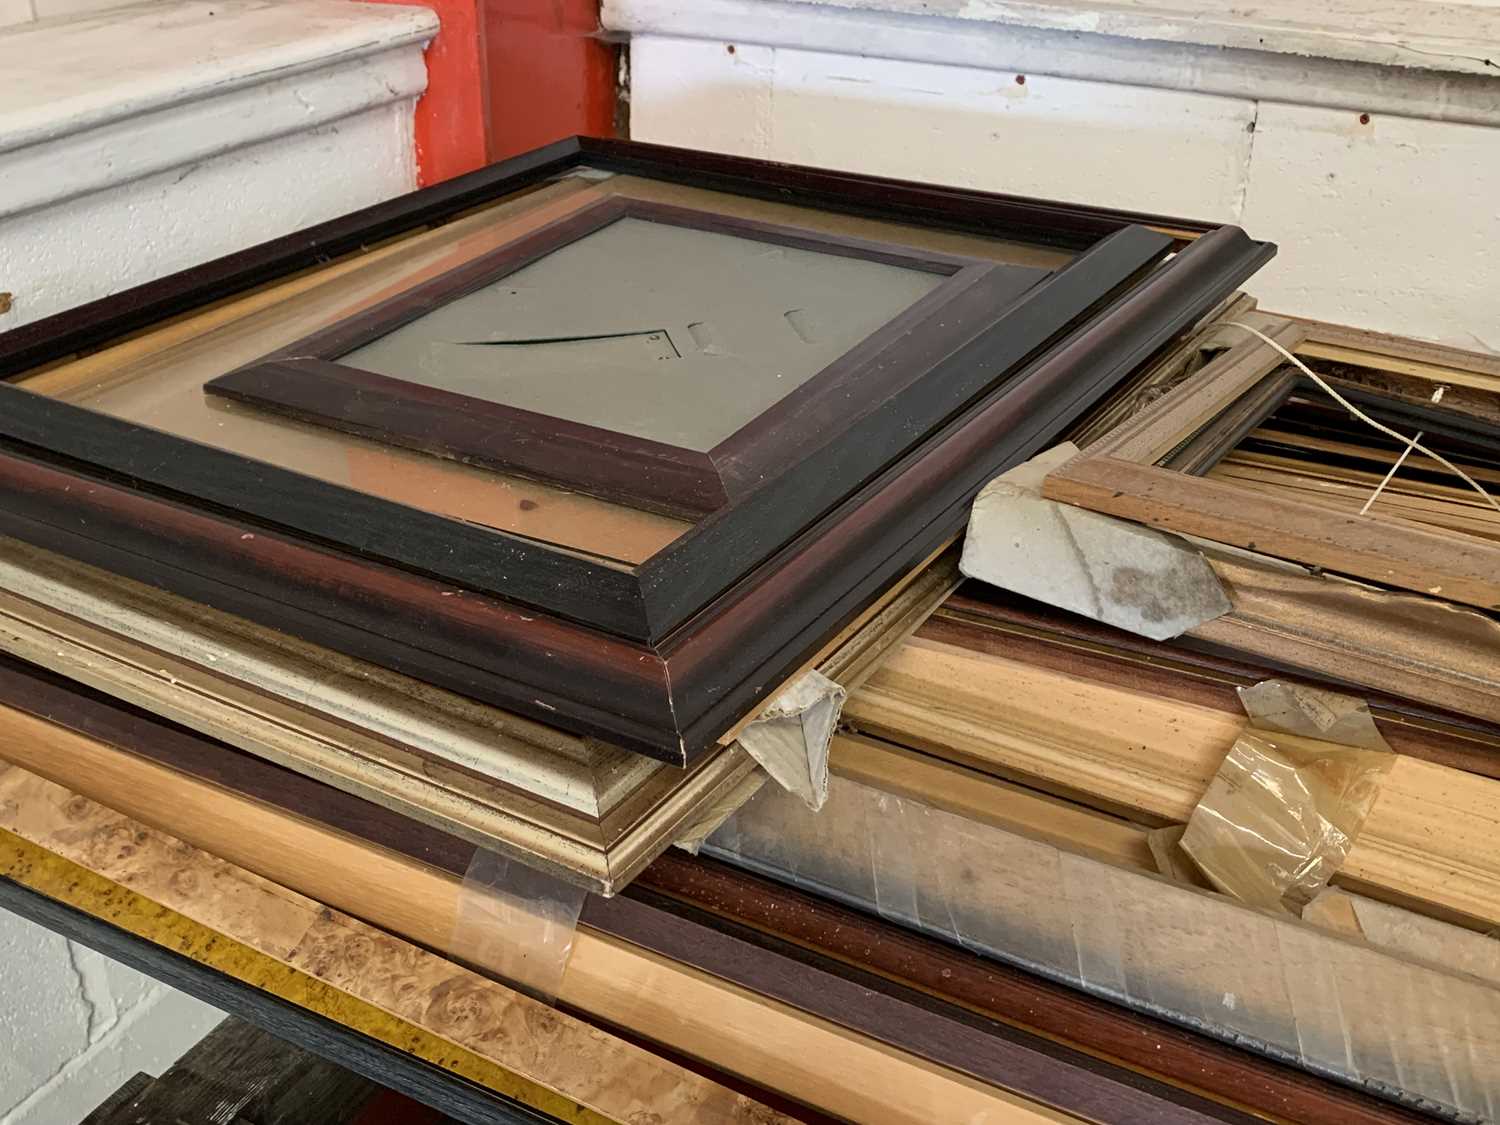 LARGE QUANTITY OF PICTURE FRAMER'S TRADING STOCK - to include some completed frames along with large - Image 4 of 4